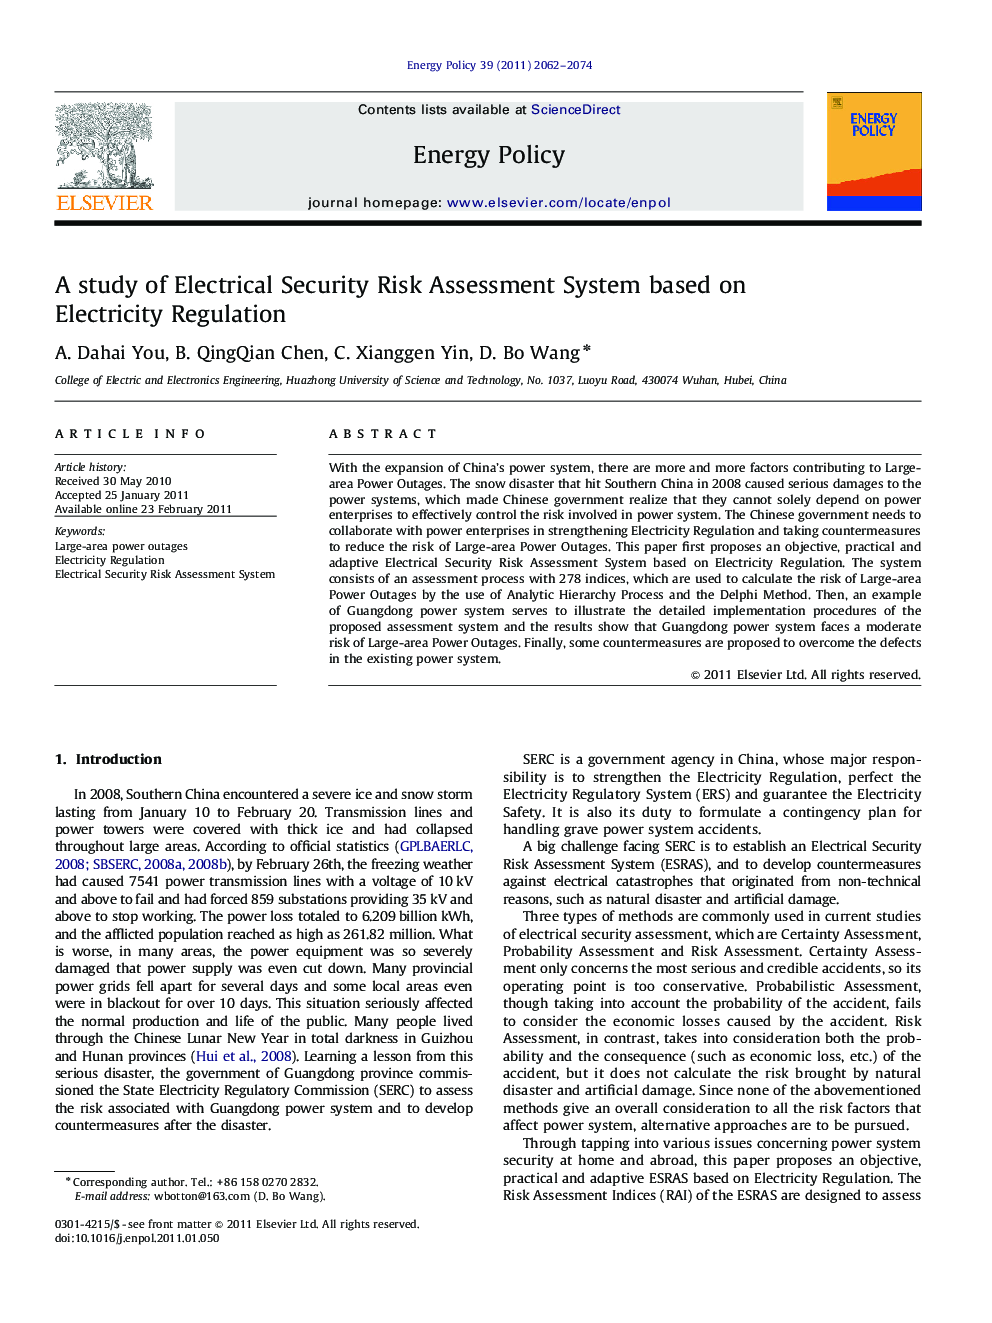 A study of Electrical Security Risk Assessment System based on Electricity Regulation